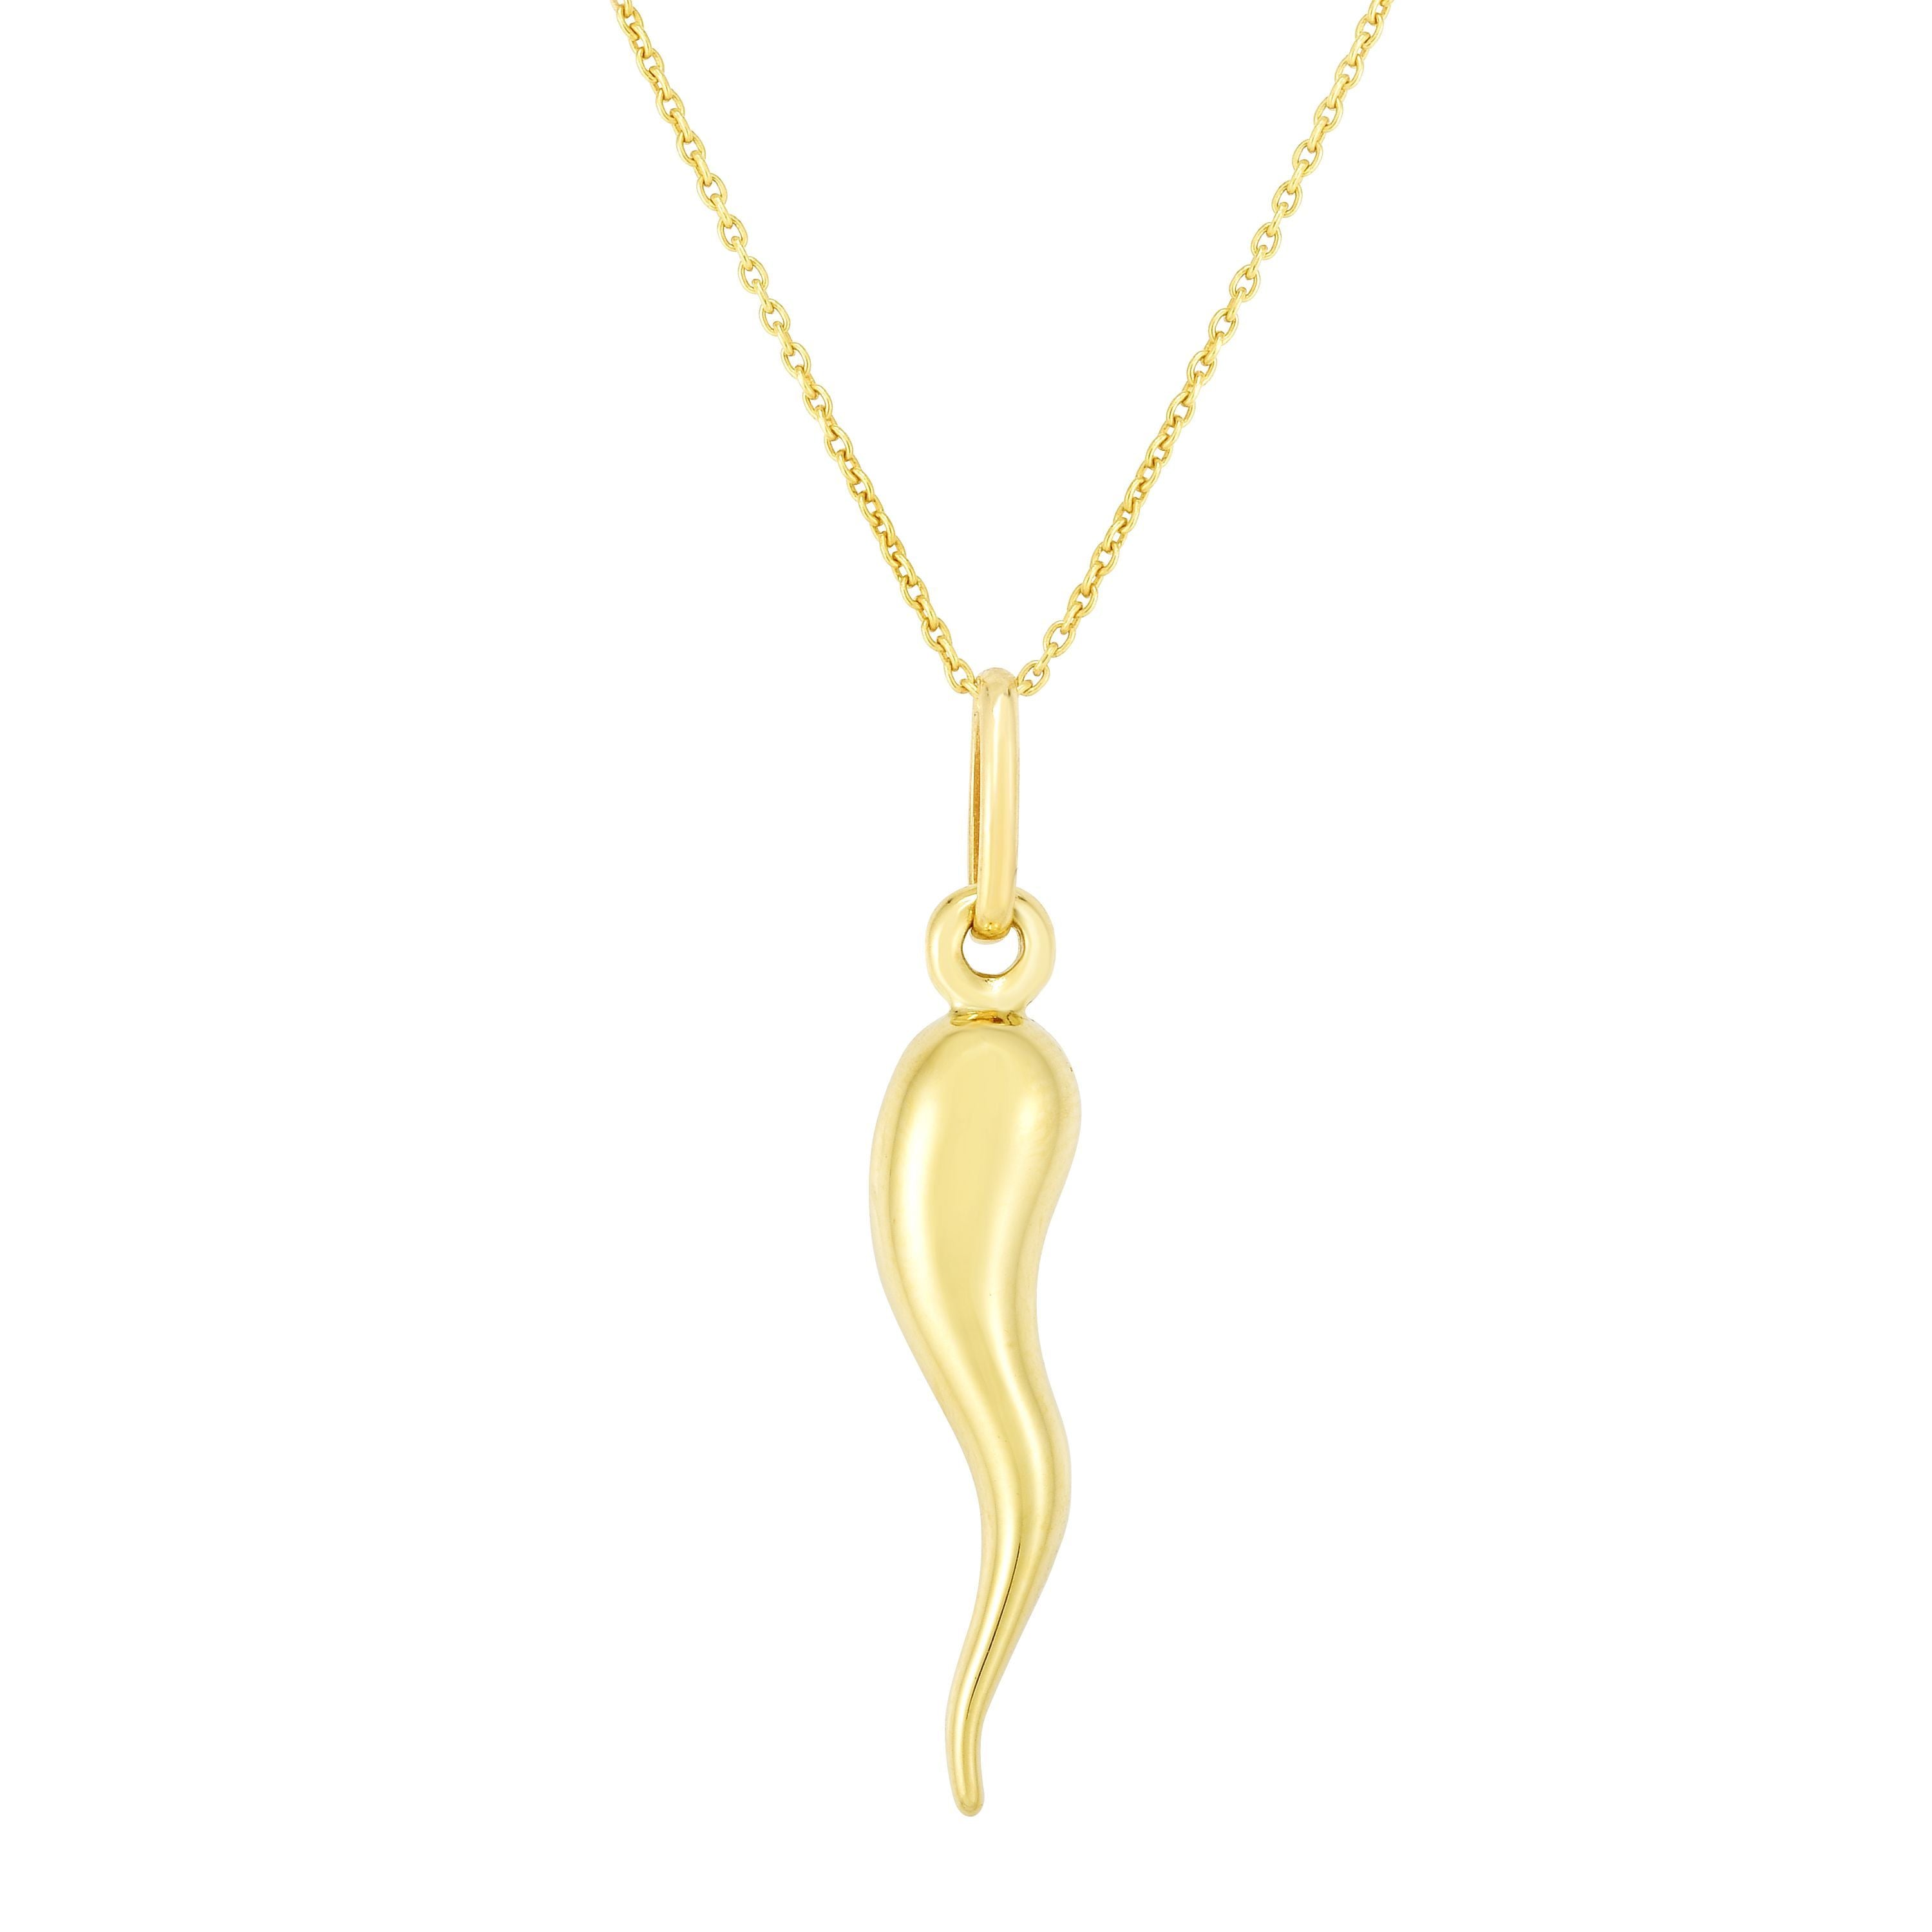 14k Yellow Gold Flame Pendant Necklace, 18" fine designer jewelry for men and women